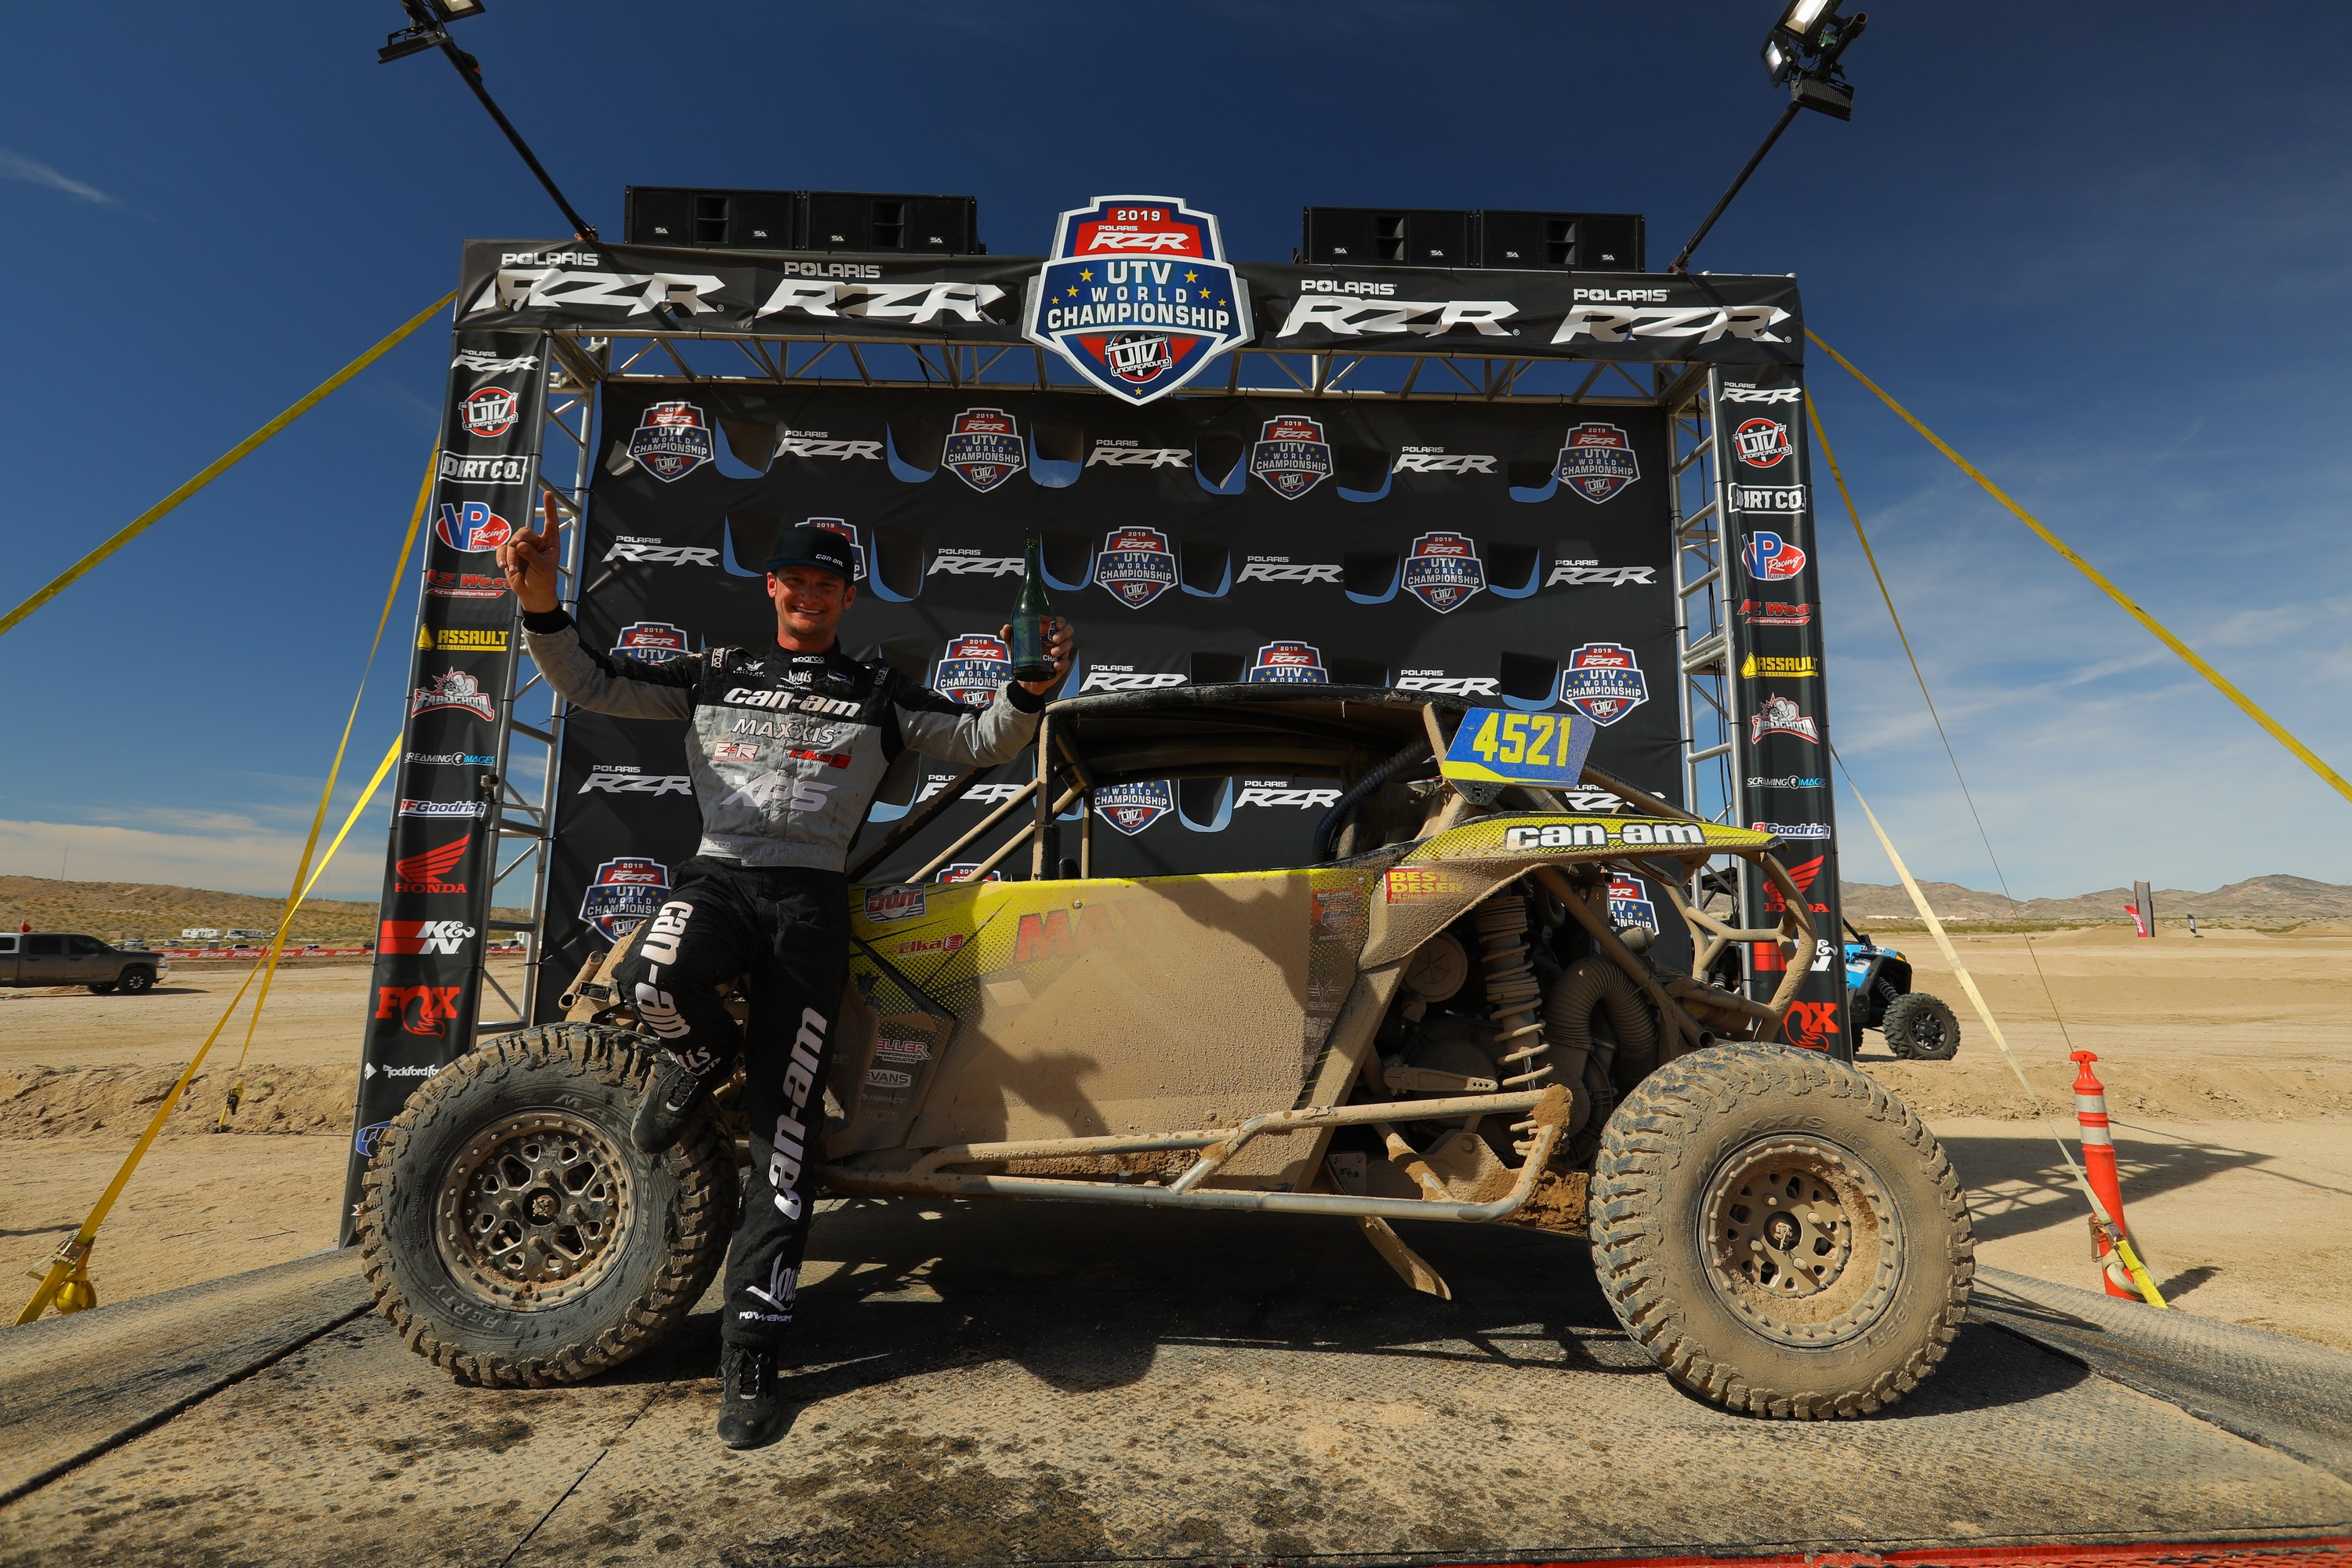 Cody Miller posing with his SxS vehicle